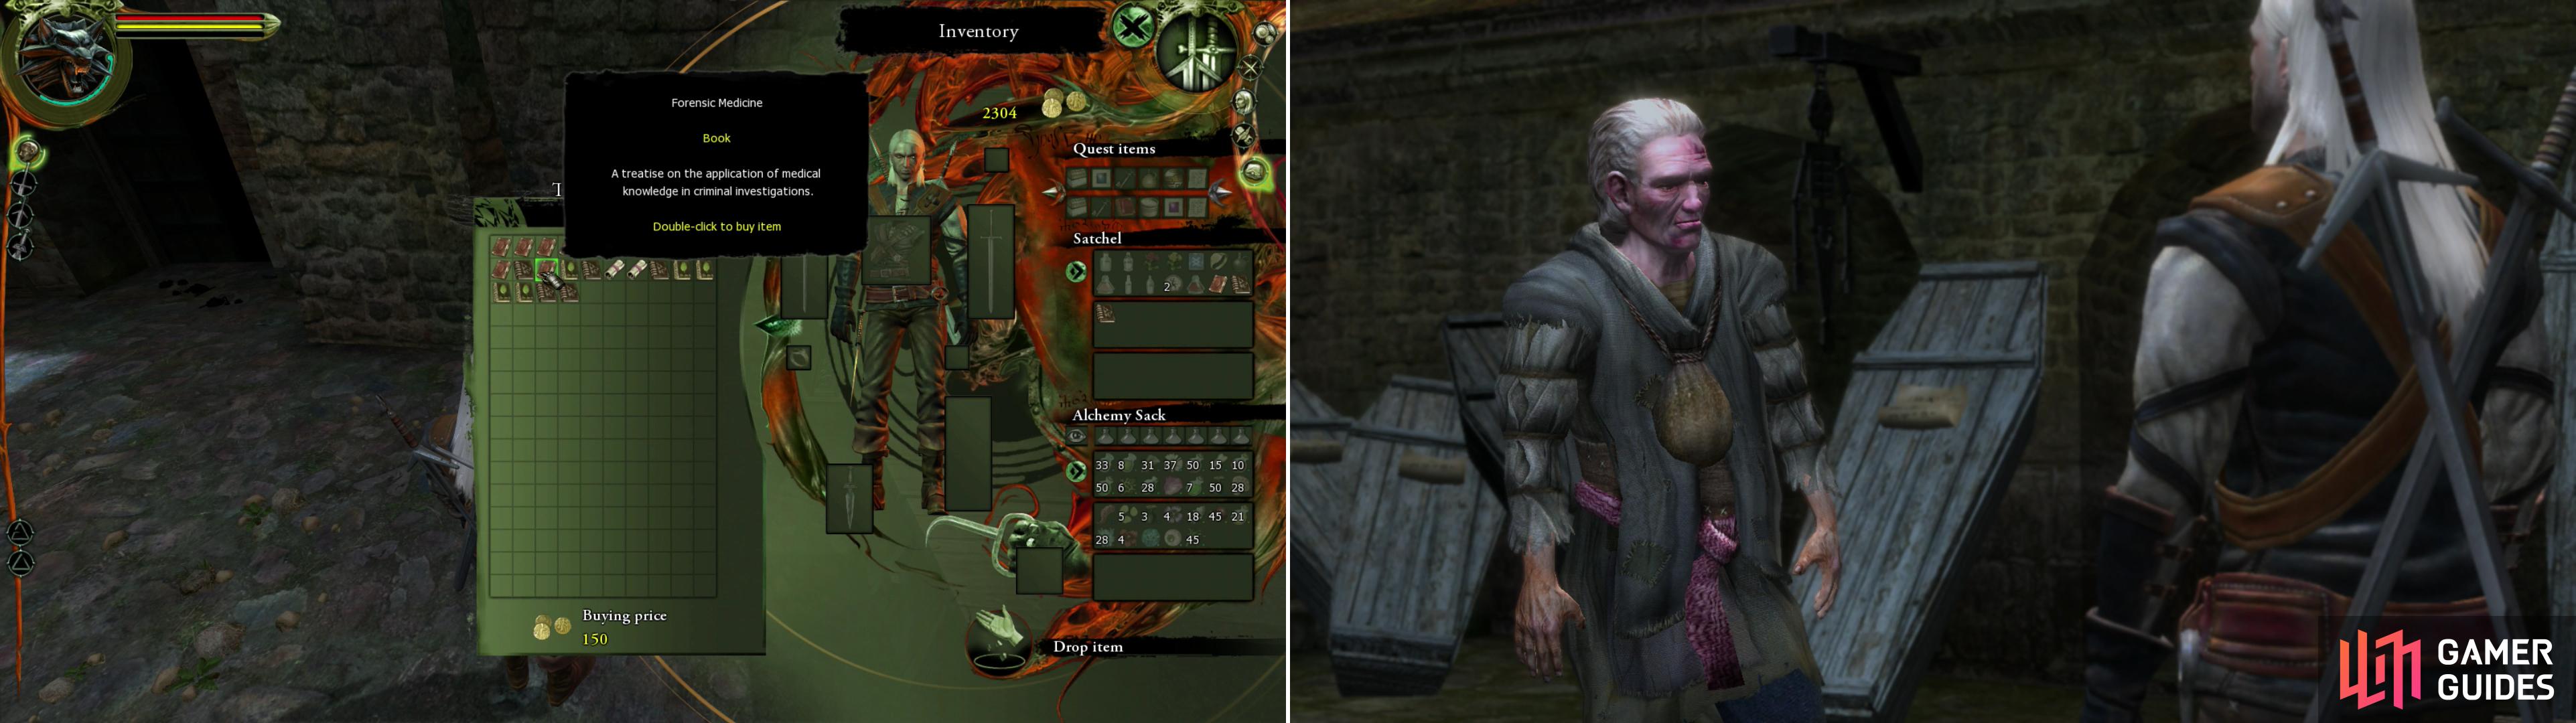 Knowledge is power-buying books from the Antiquarian will allow you to draw the correct conclusions during your autopsy (left). To gain access to the Cemetery-and the dead Salamander's body-you'll need to bribe the Gravedigger with dwarven spirits and either get his debts canceled or go over his head (right).